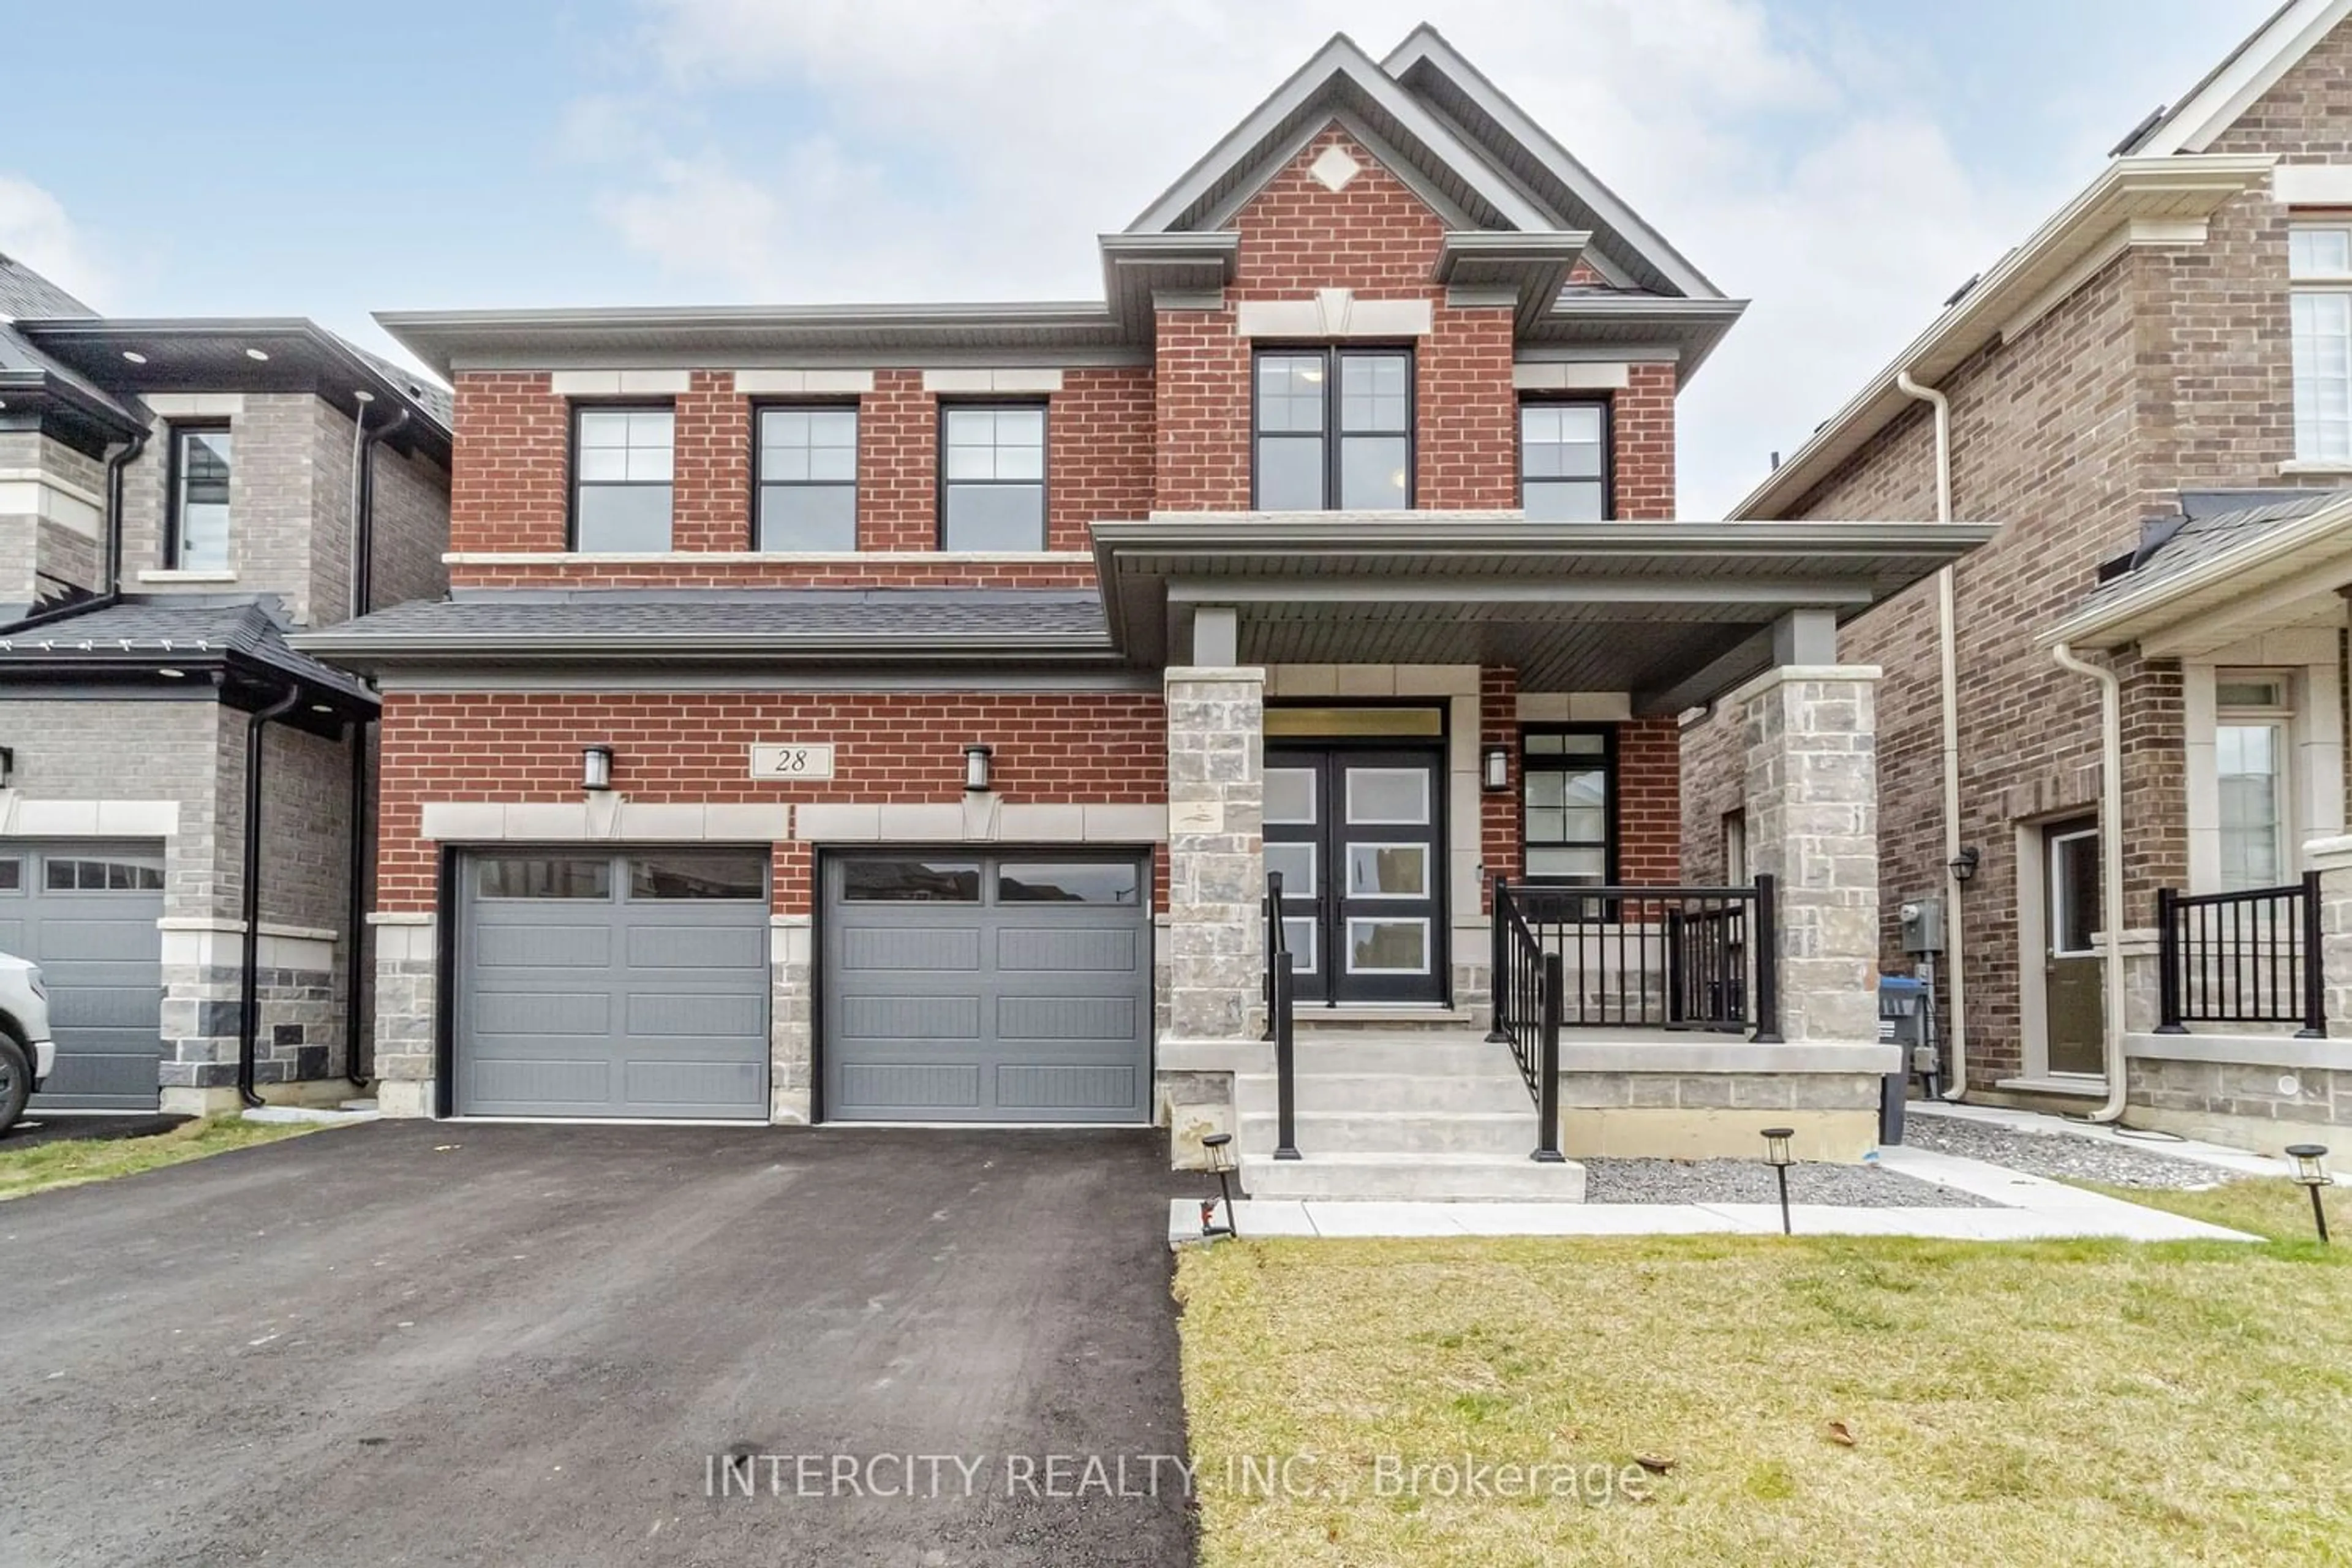 Home with brick exterior material for 28 Affusion Rd, Brampton Ontario L7A 5G1